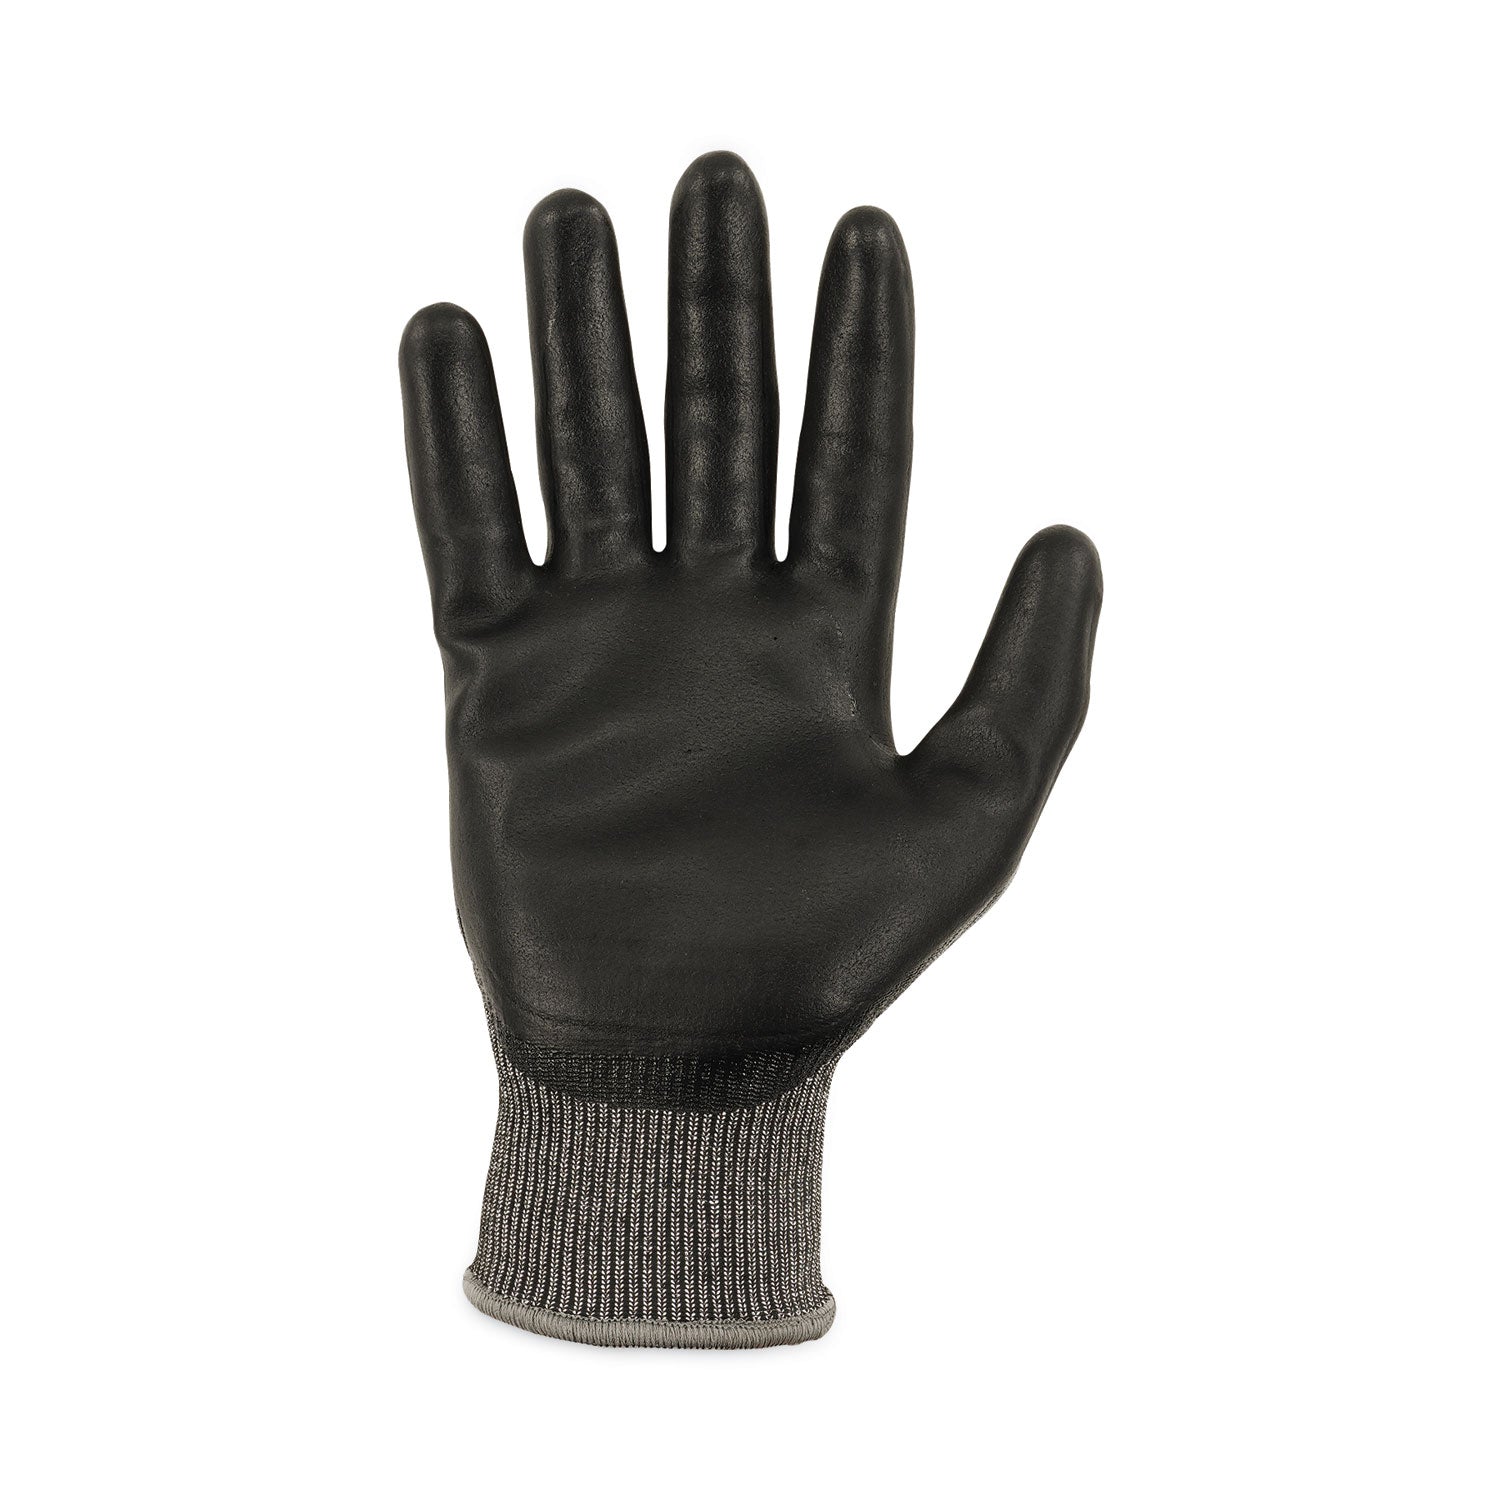 proflex-7072-ansi-a7-nitrile-coated-cr-gloves-gray-medium-12-pairs-pack-ships-in-1-3-business-days_ego10303 - 5